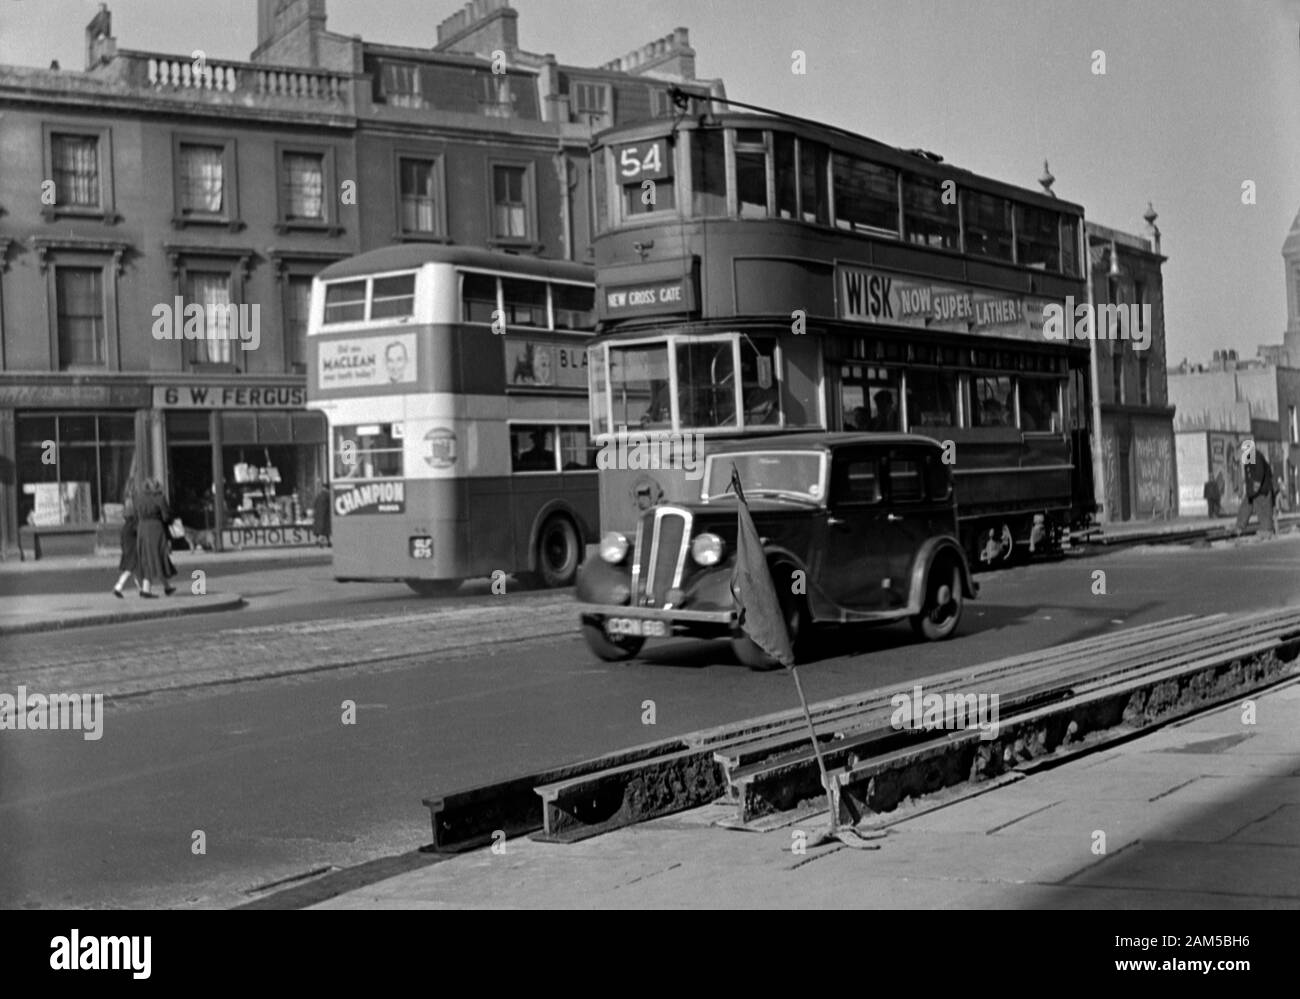 London Tram No 575 0n Route 54 to New Cross Gate, Circa late 1940s/early 1950s Stock Photo